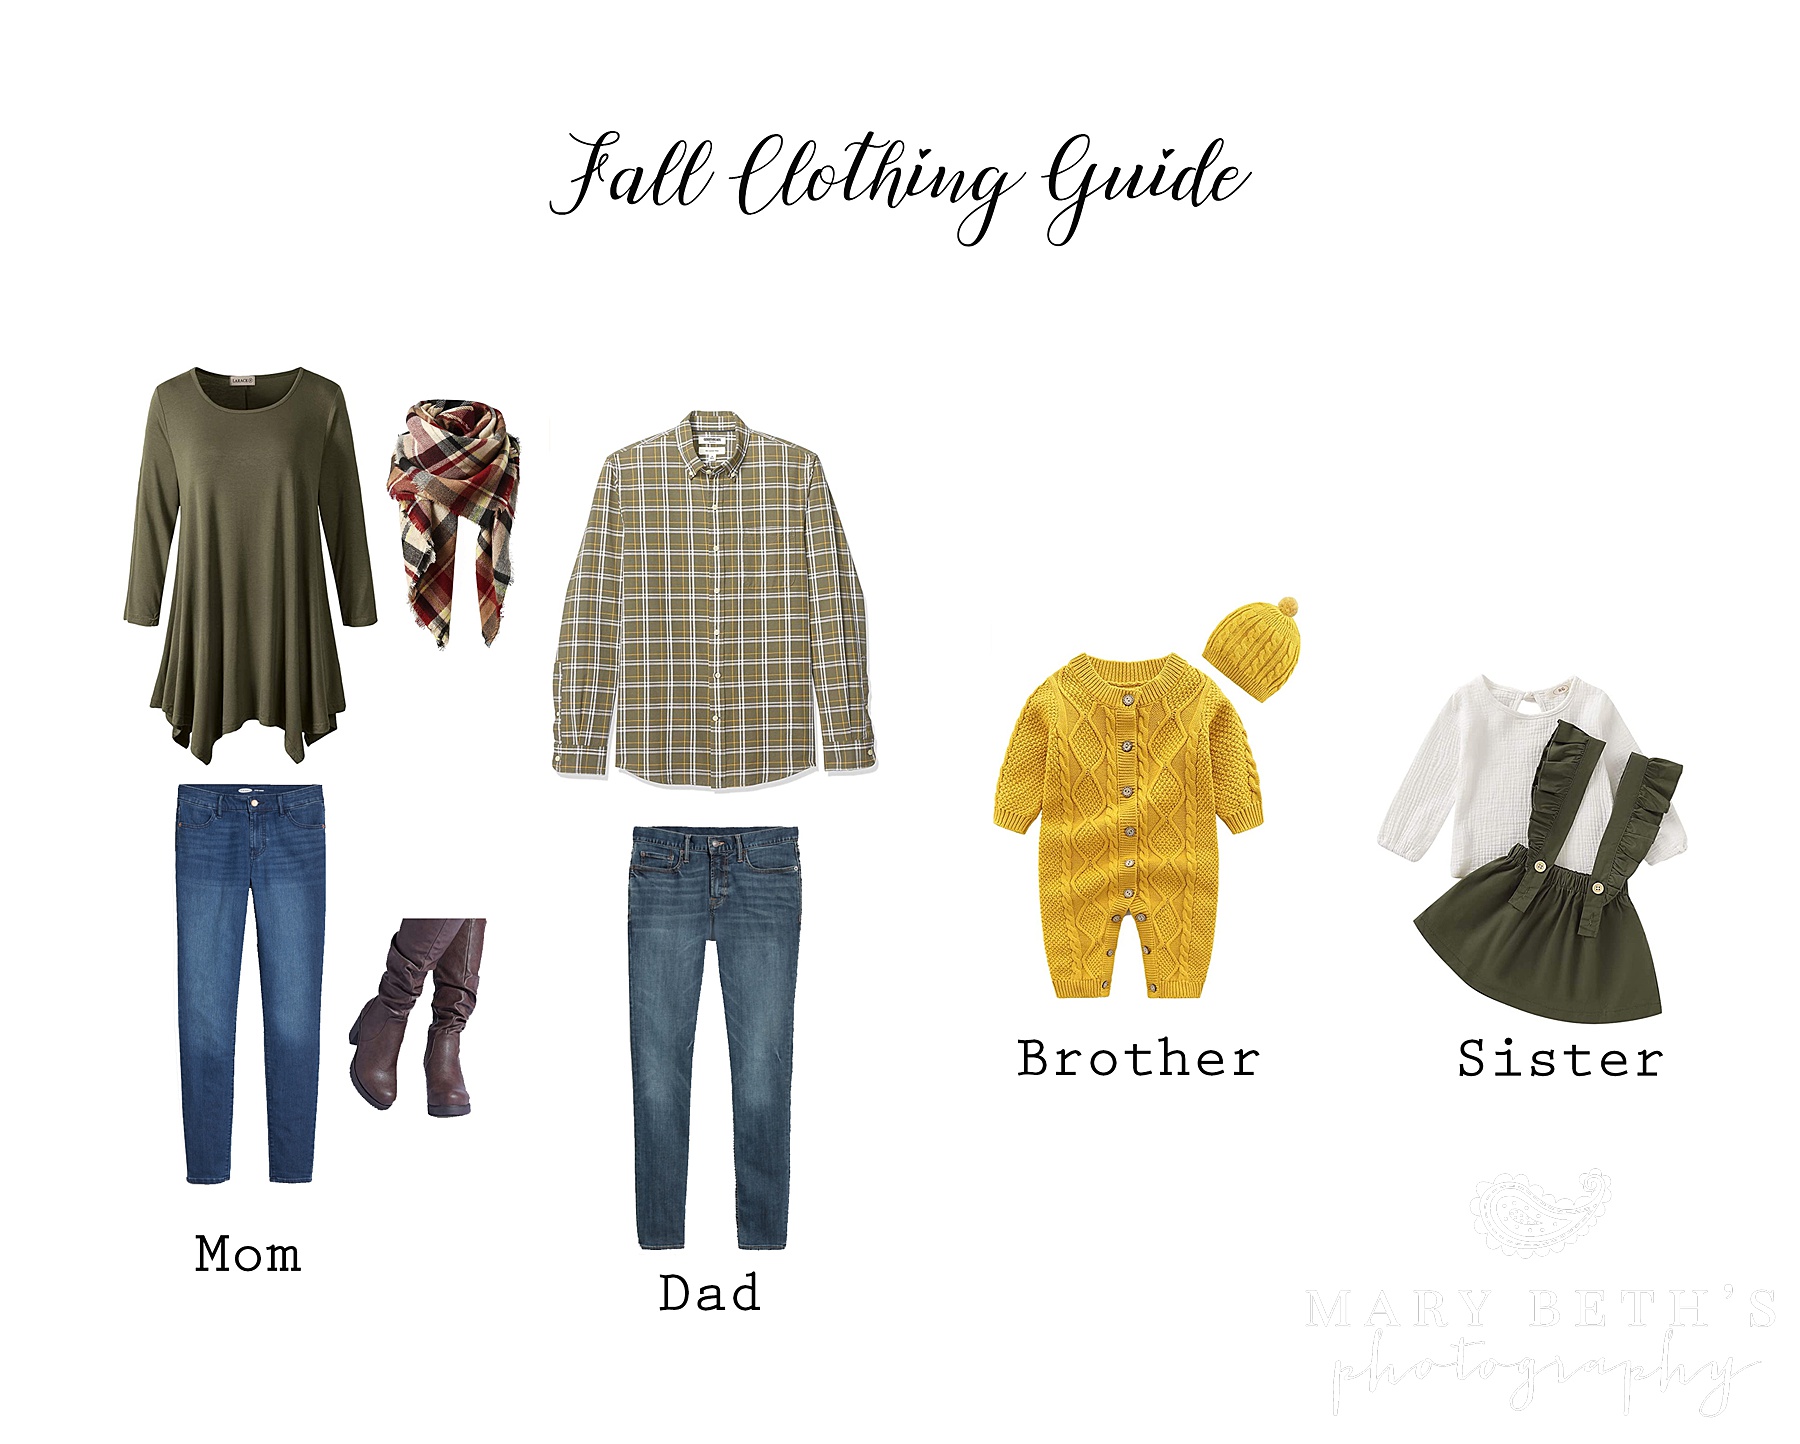 outfit inspiration for family photos